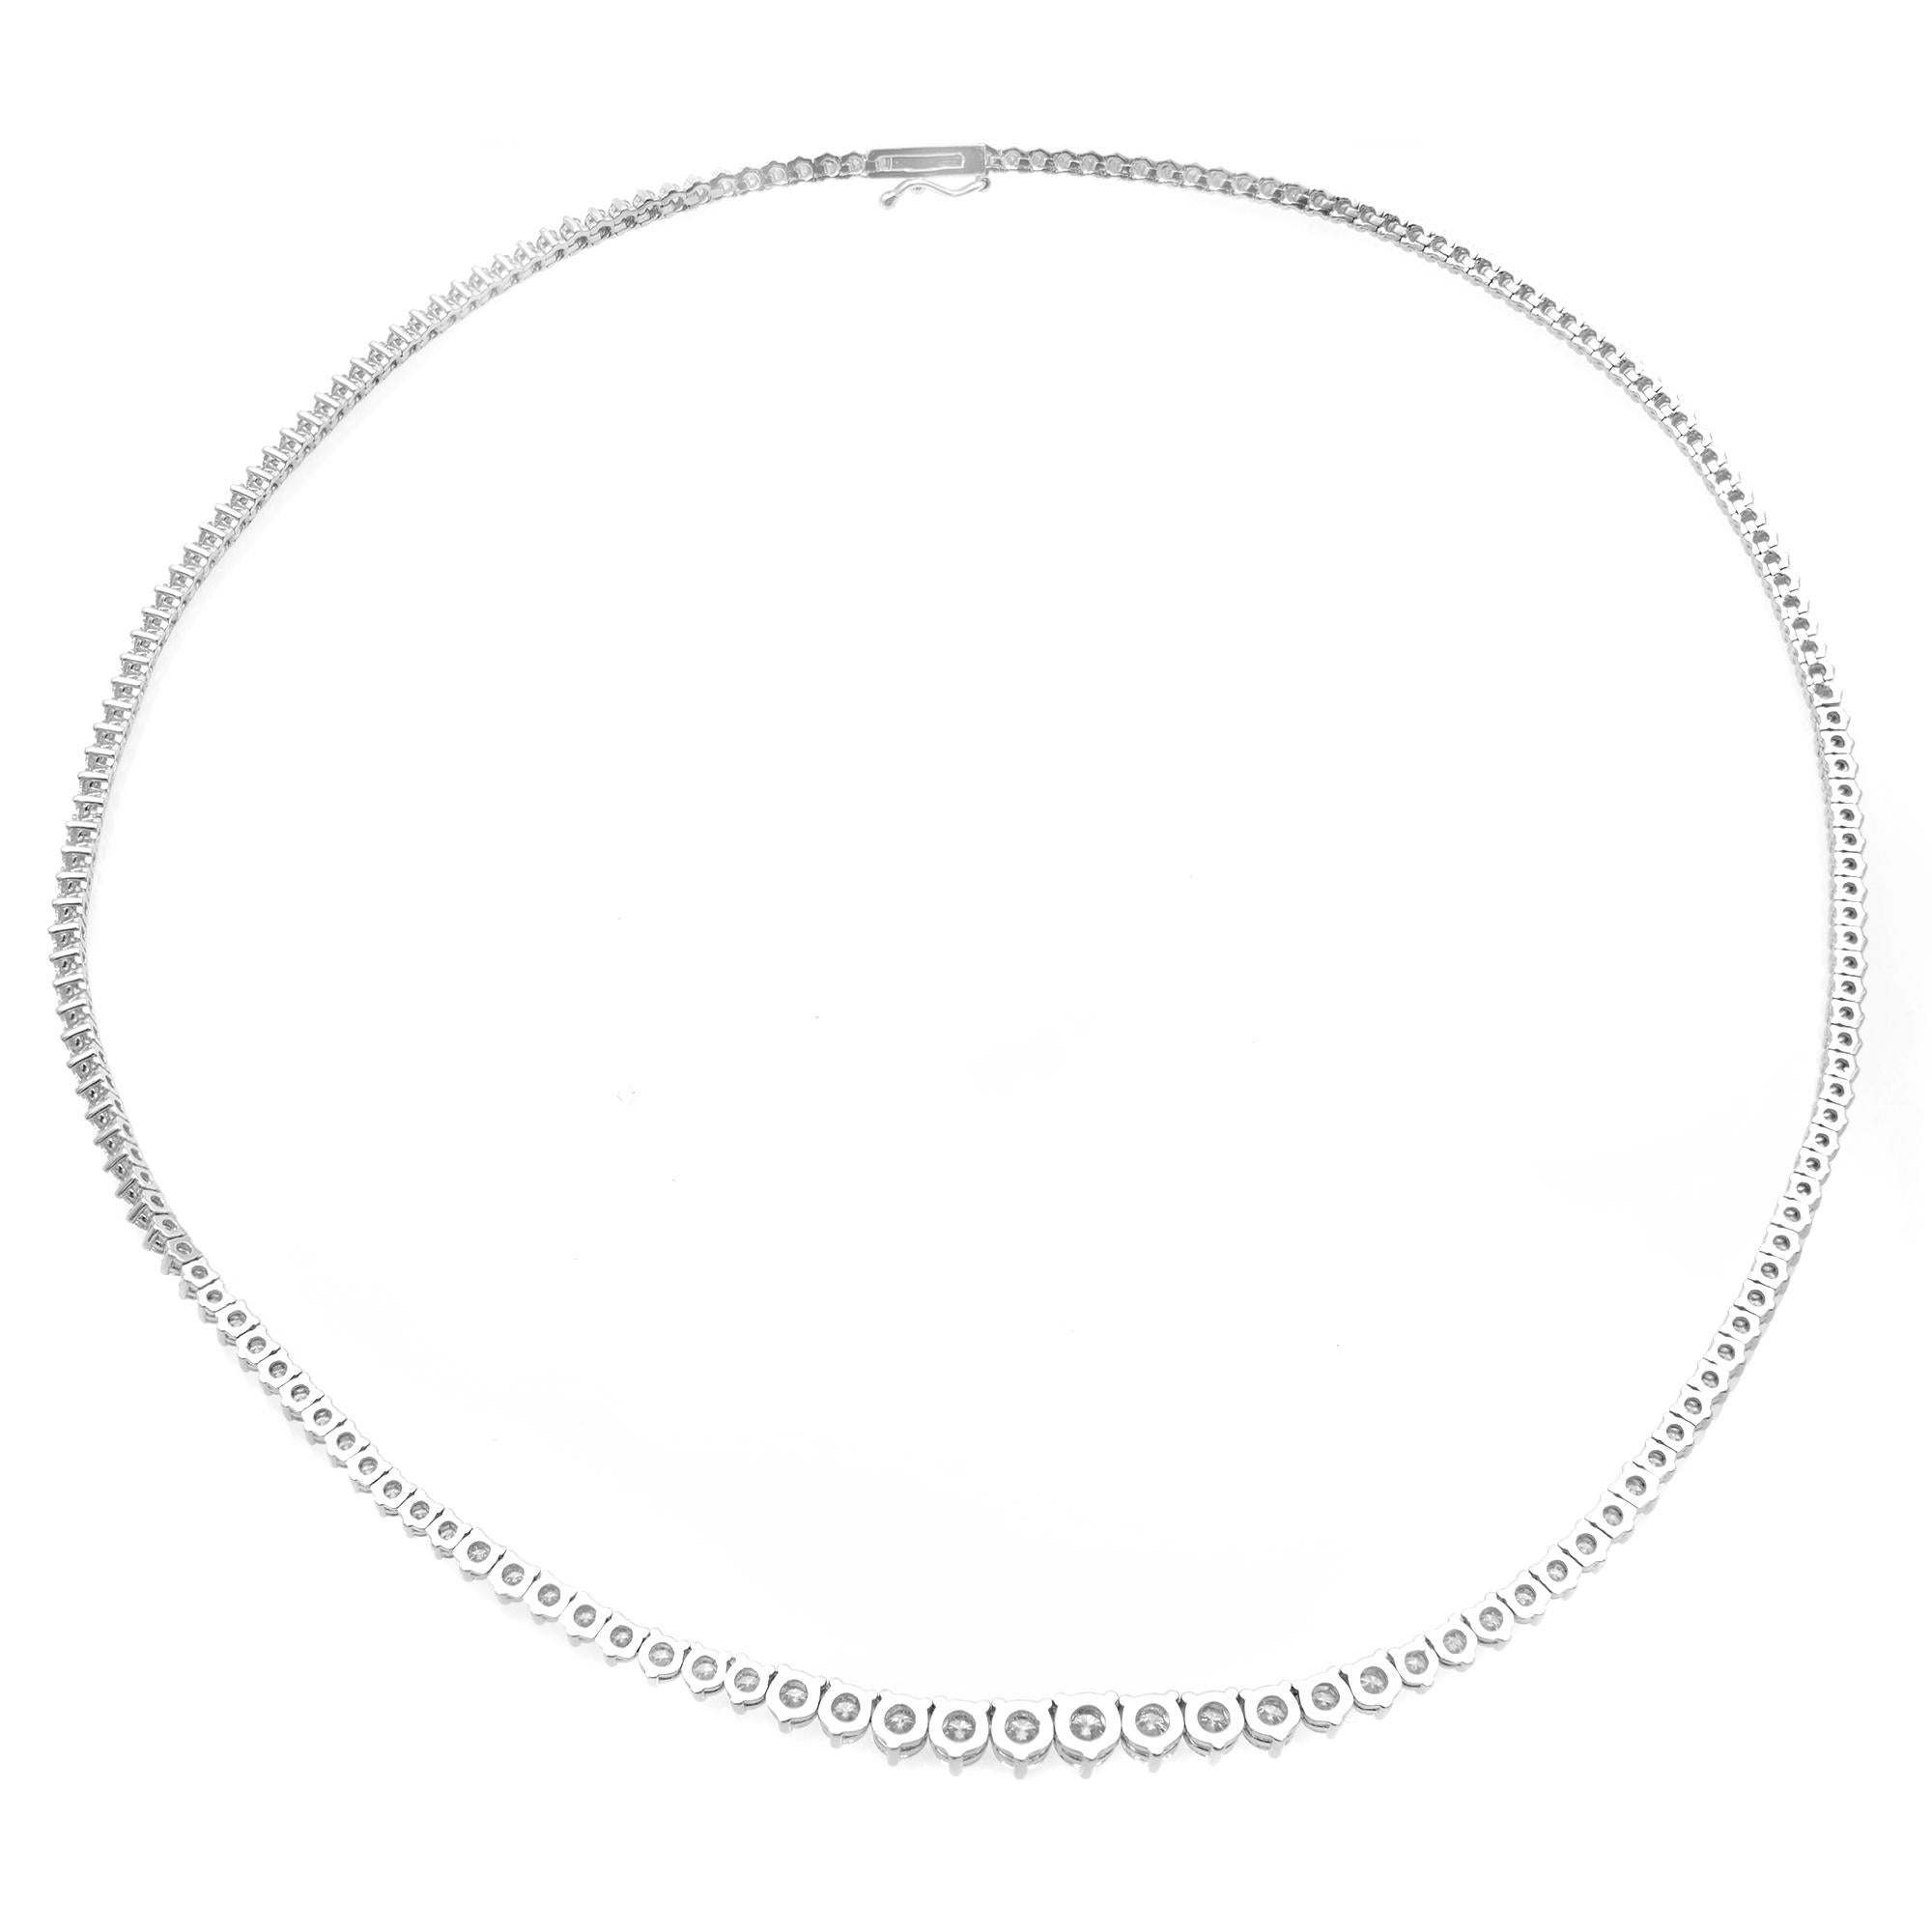 This stylish graduated necklace features glistening round diamonds that sparkle brightly for a glamorous and charming look. This piece is set with 177 round cut diamonds 10.00cttw. Diamond color F-G and VS-SI clarity. Push-button clasp. The necklace